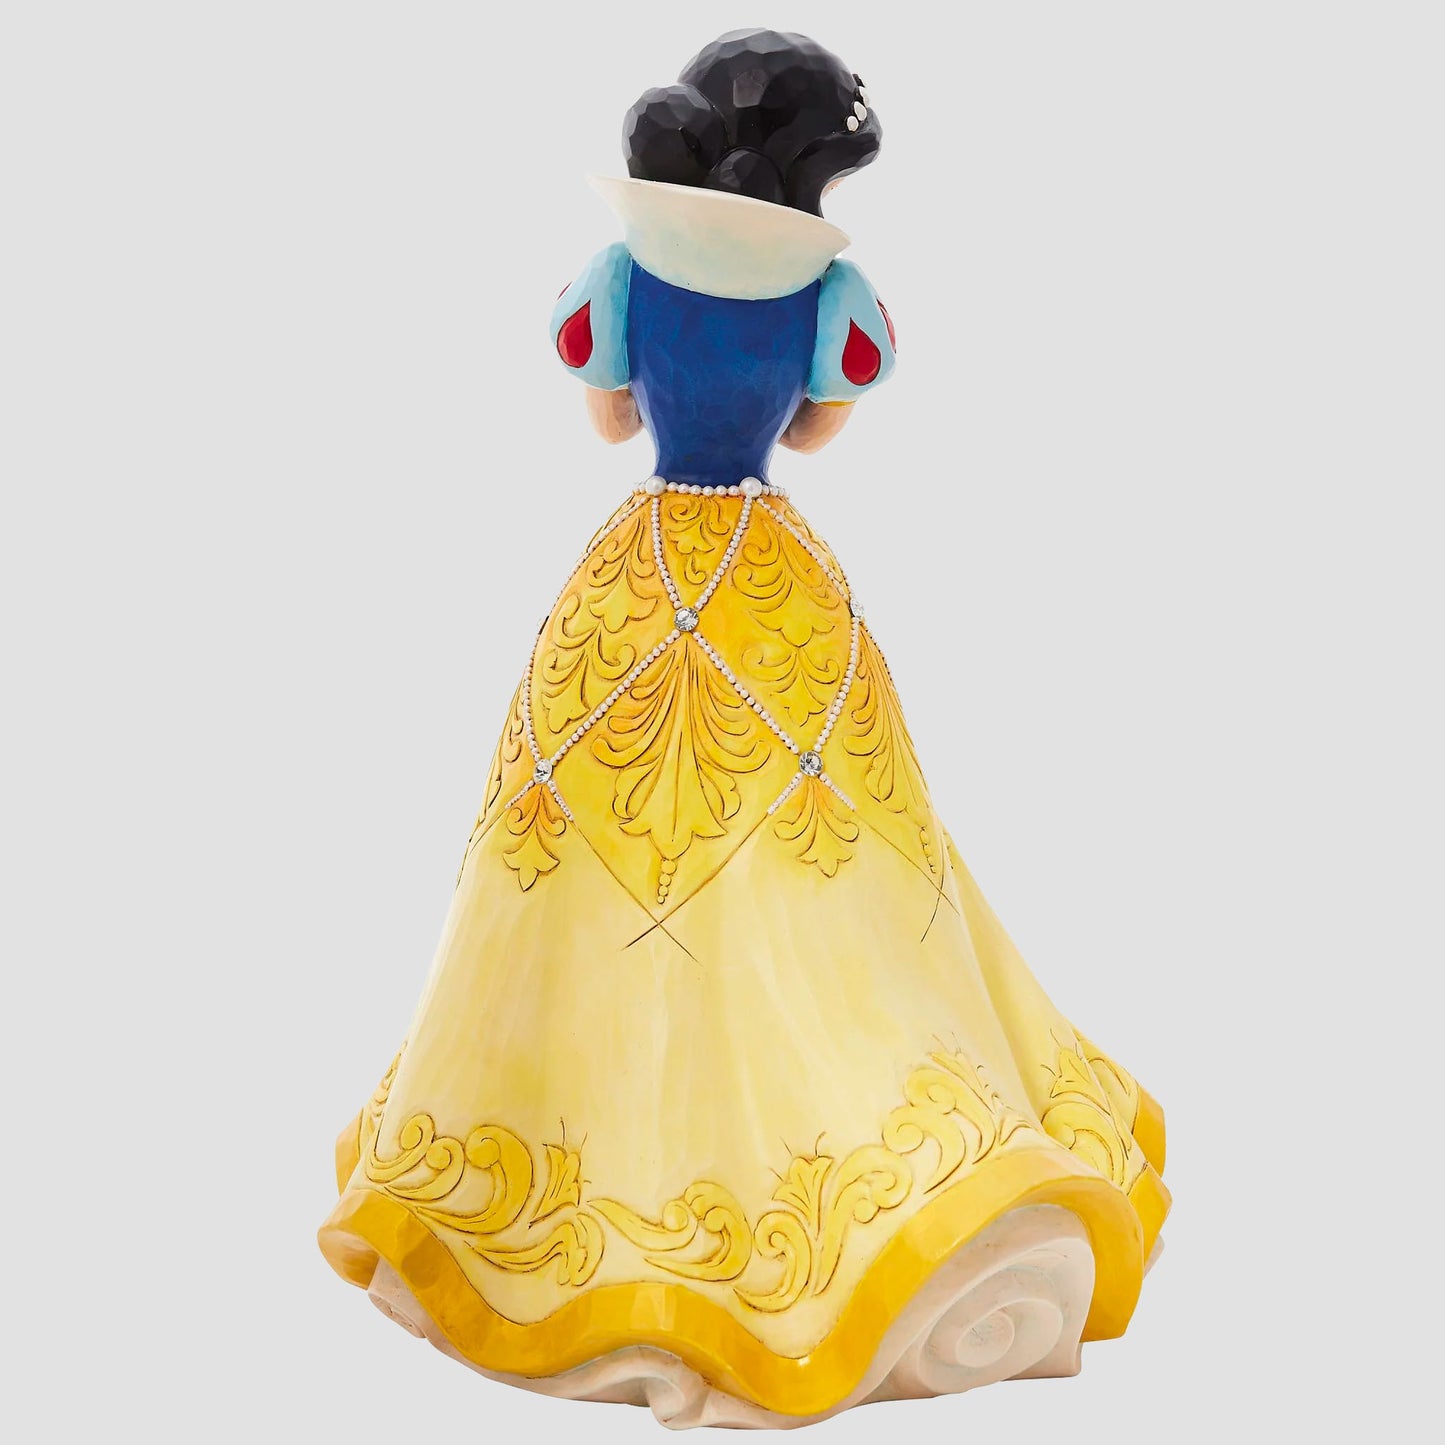 Snow White "The Fairest of All" (Snow White and the Seven Dwarfs) Deluxe Disney Traditions Statue